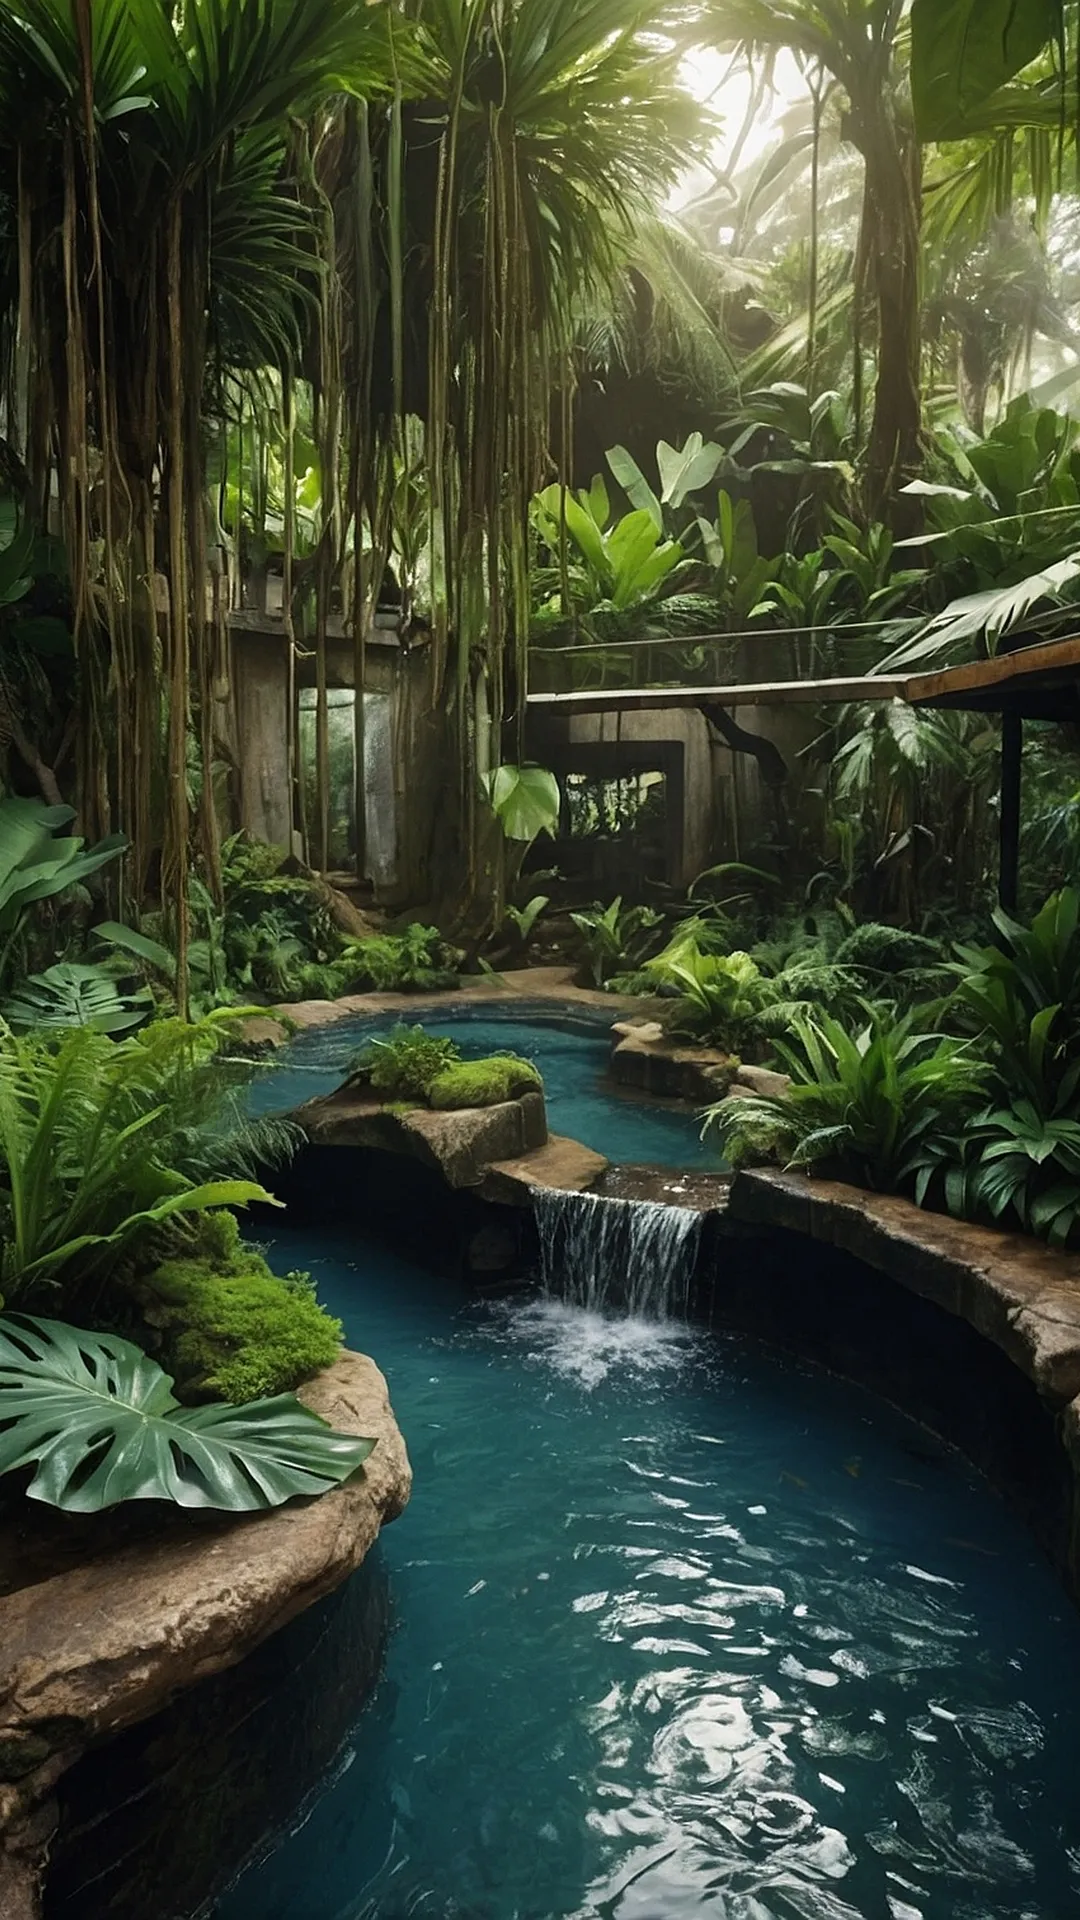 Jungle Chic: Garden Inspirations from the Wild